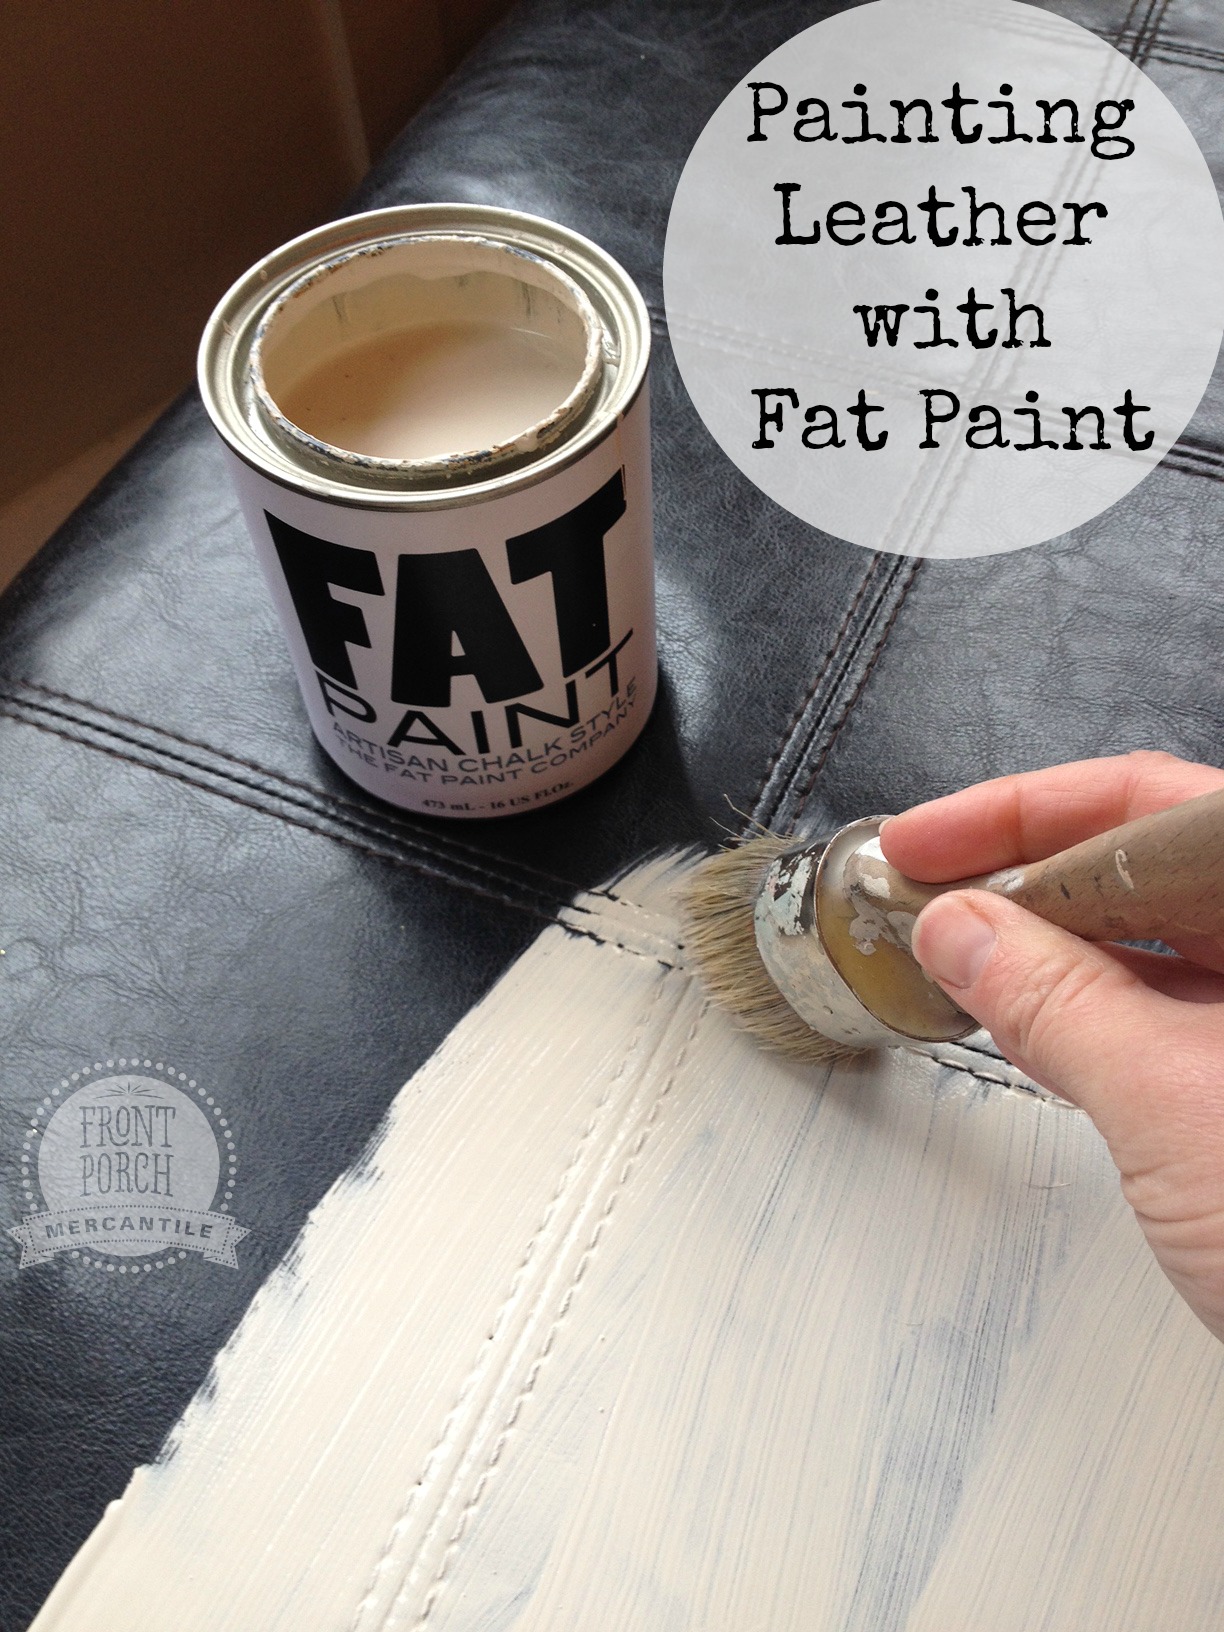 Painting Leather with Fat Paint